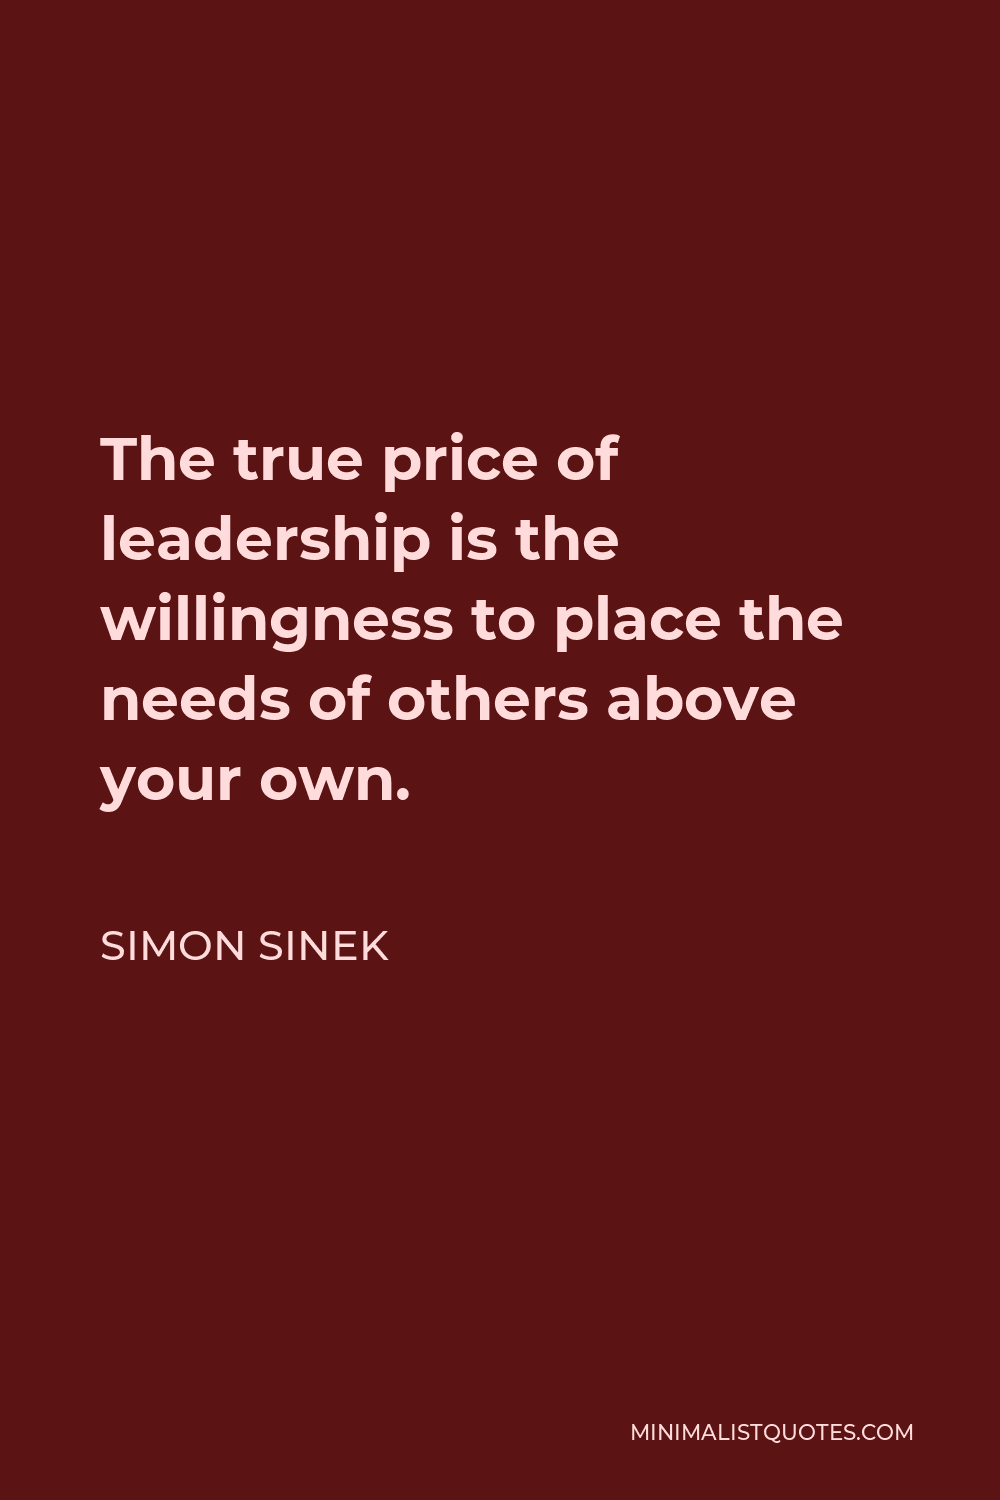 Simon Sinek Quote - The true price of leadership is the willingness to place the needs of others above your own.